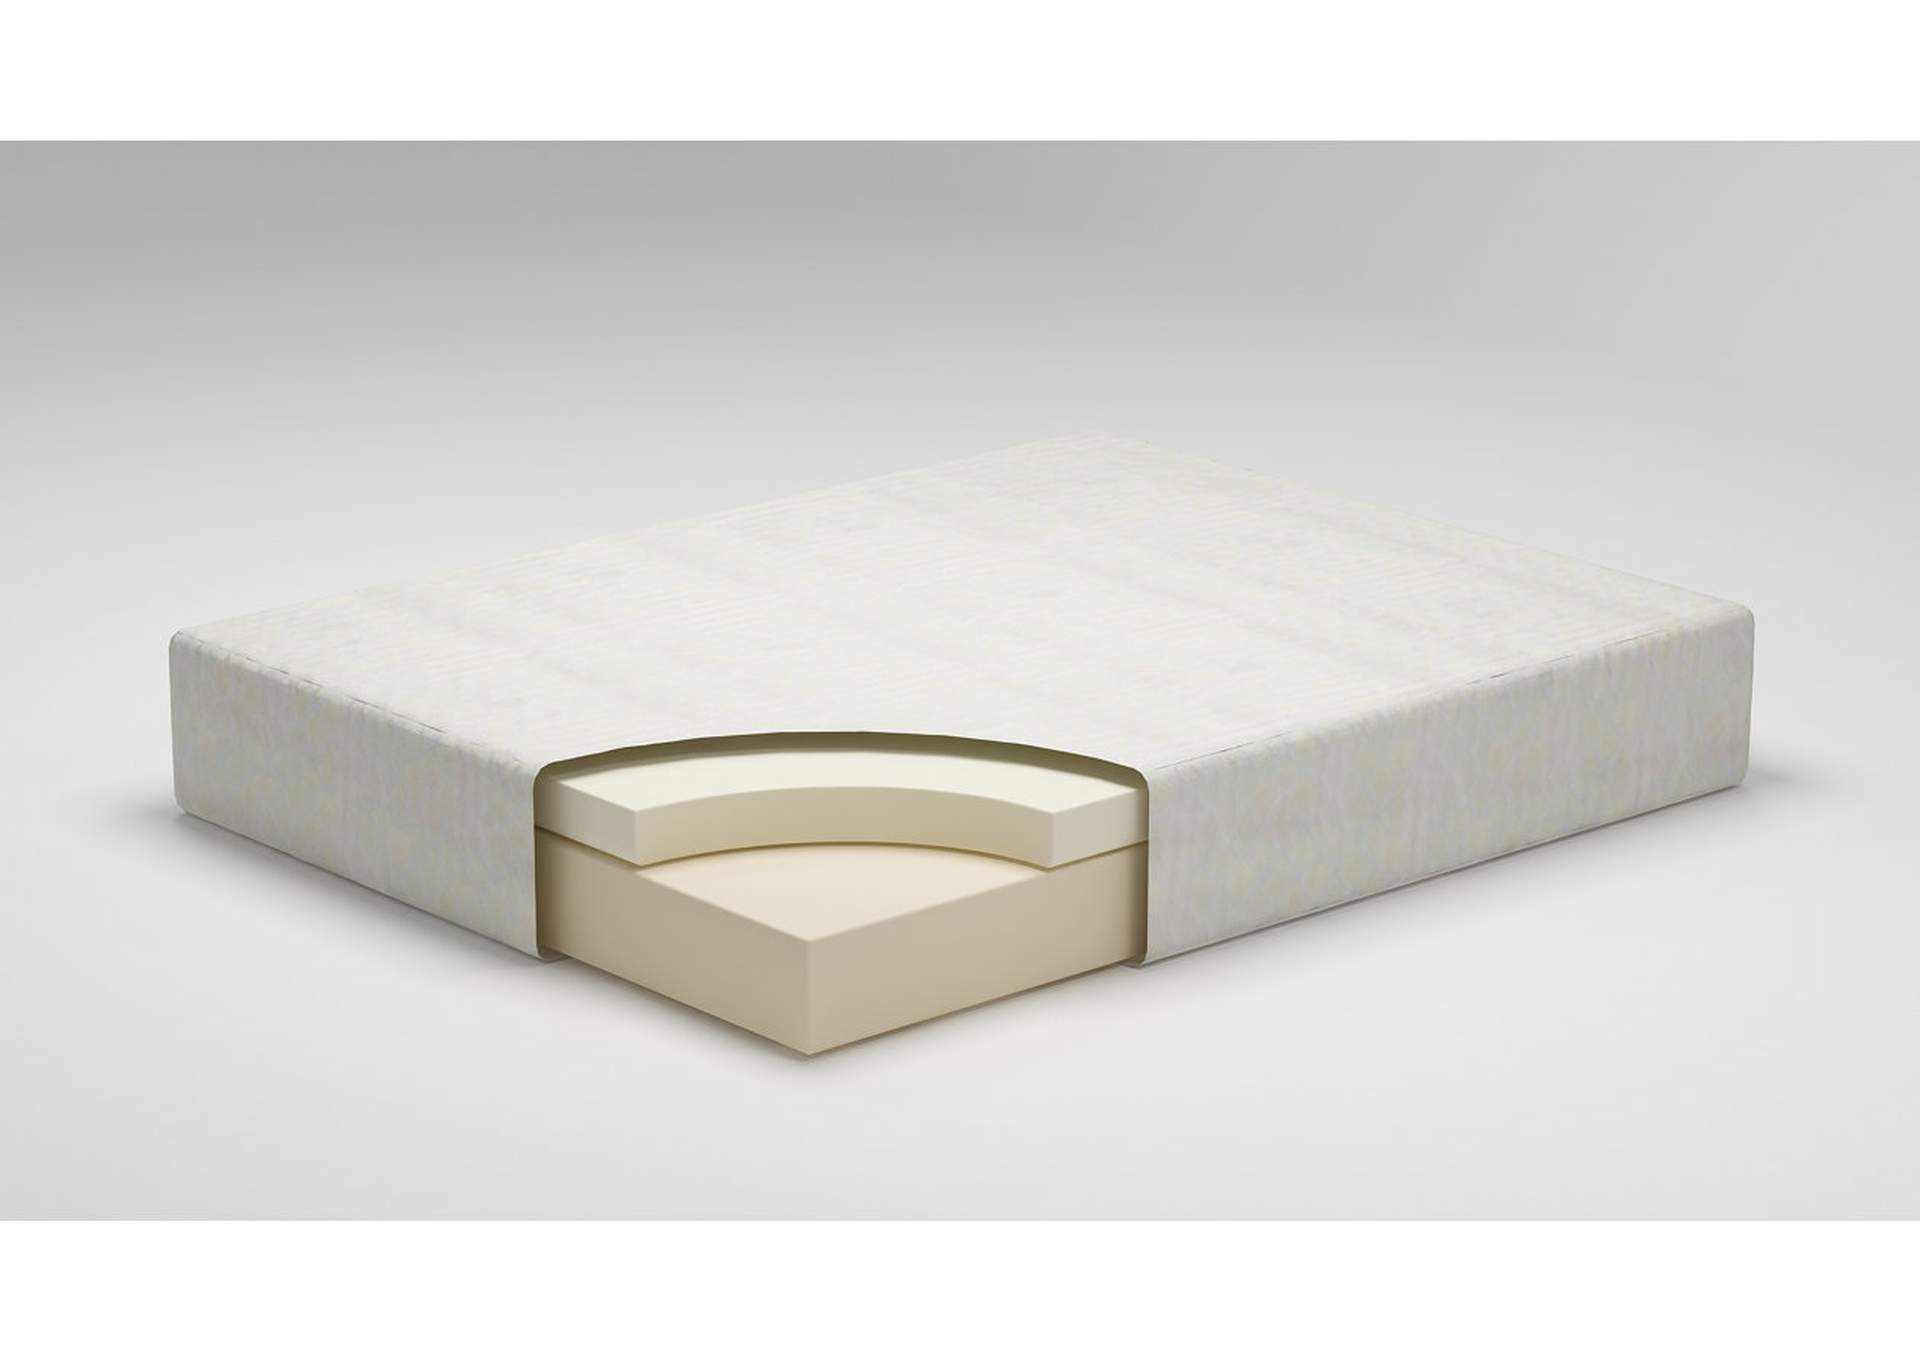 Chime 12 Inch Memory Foam Twin Mattress in a Box,Direct To Consumer Express